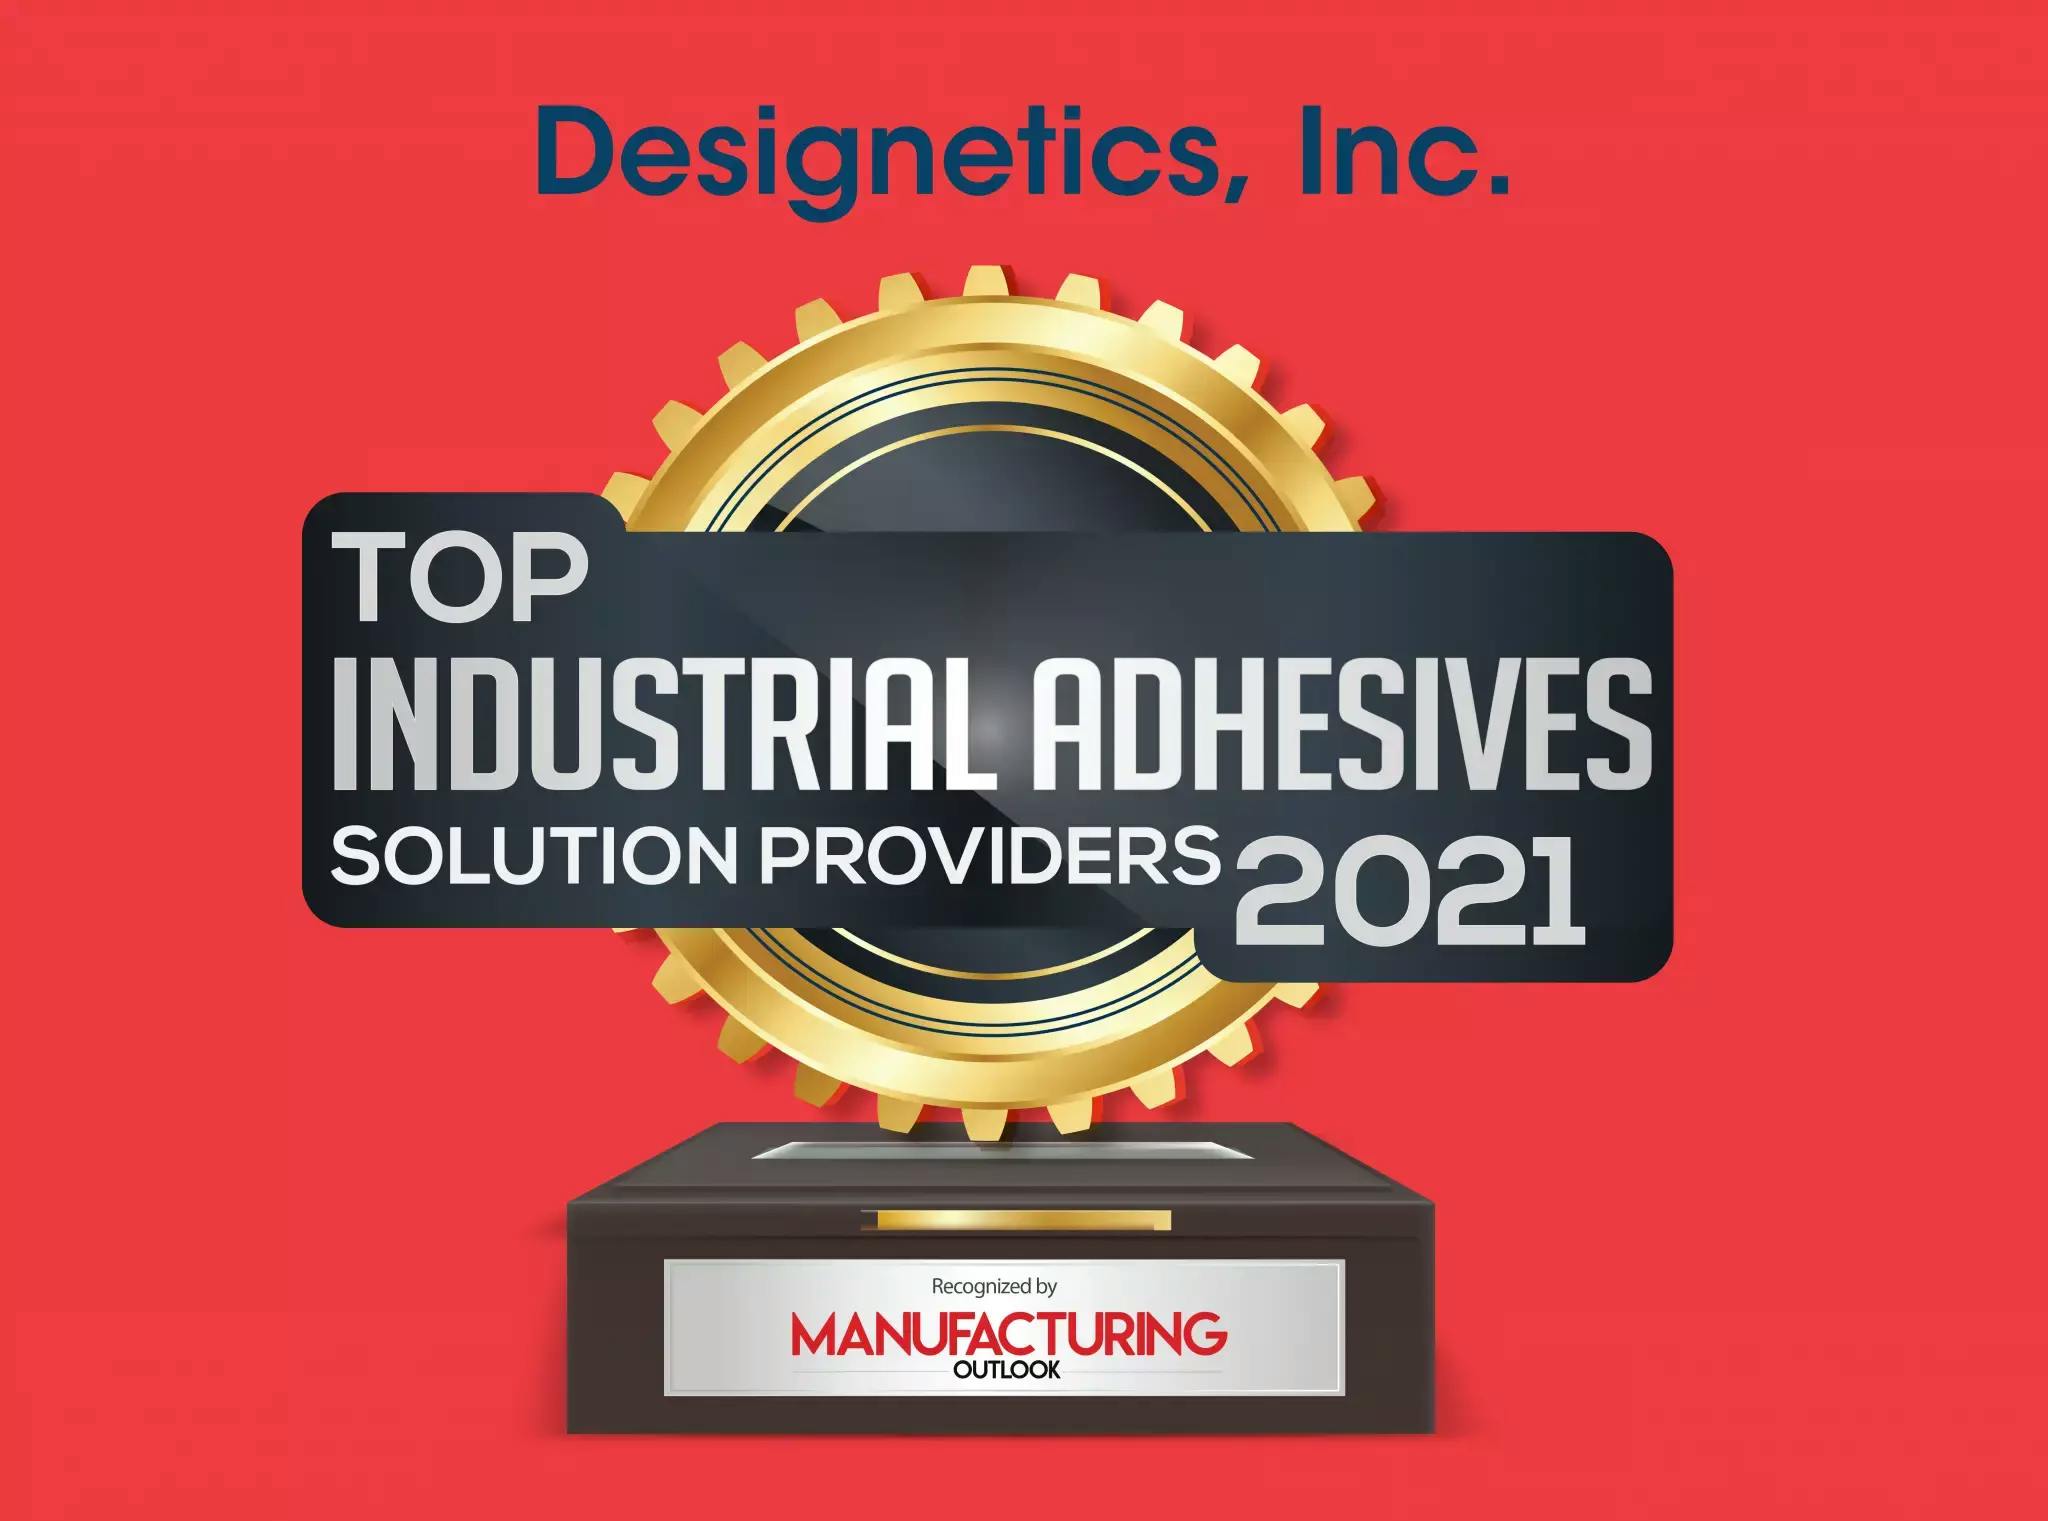 Designetics gets honored Top Industrial Adhesives 2021.